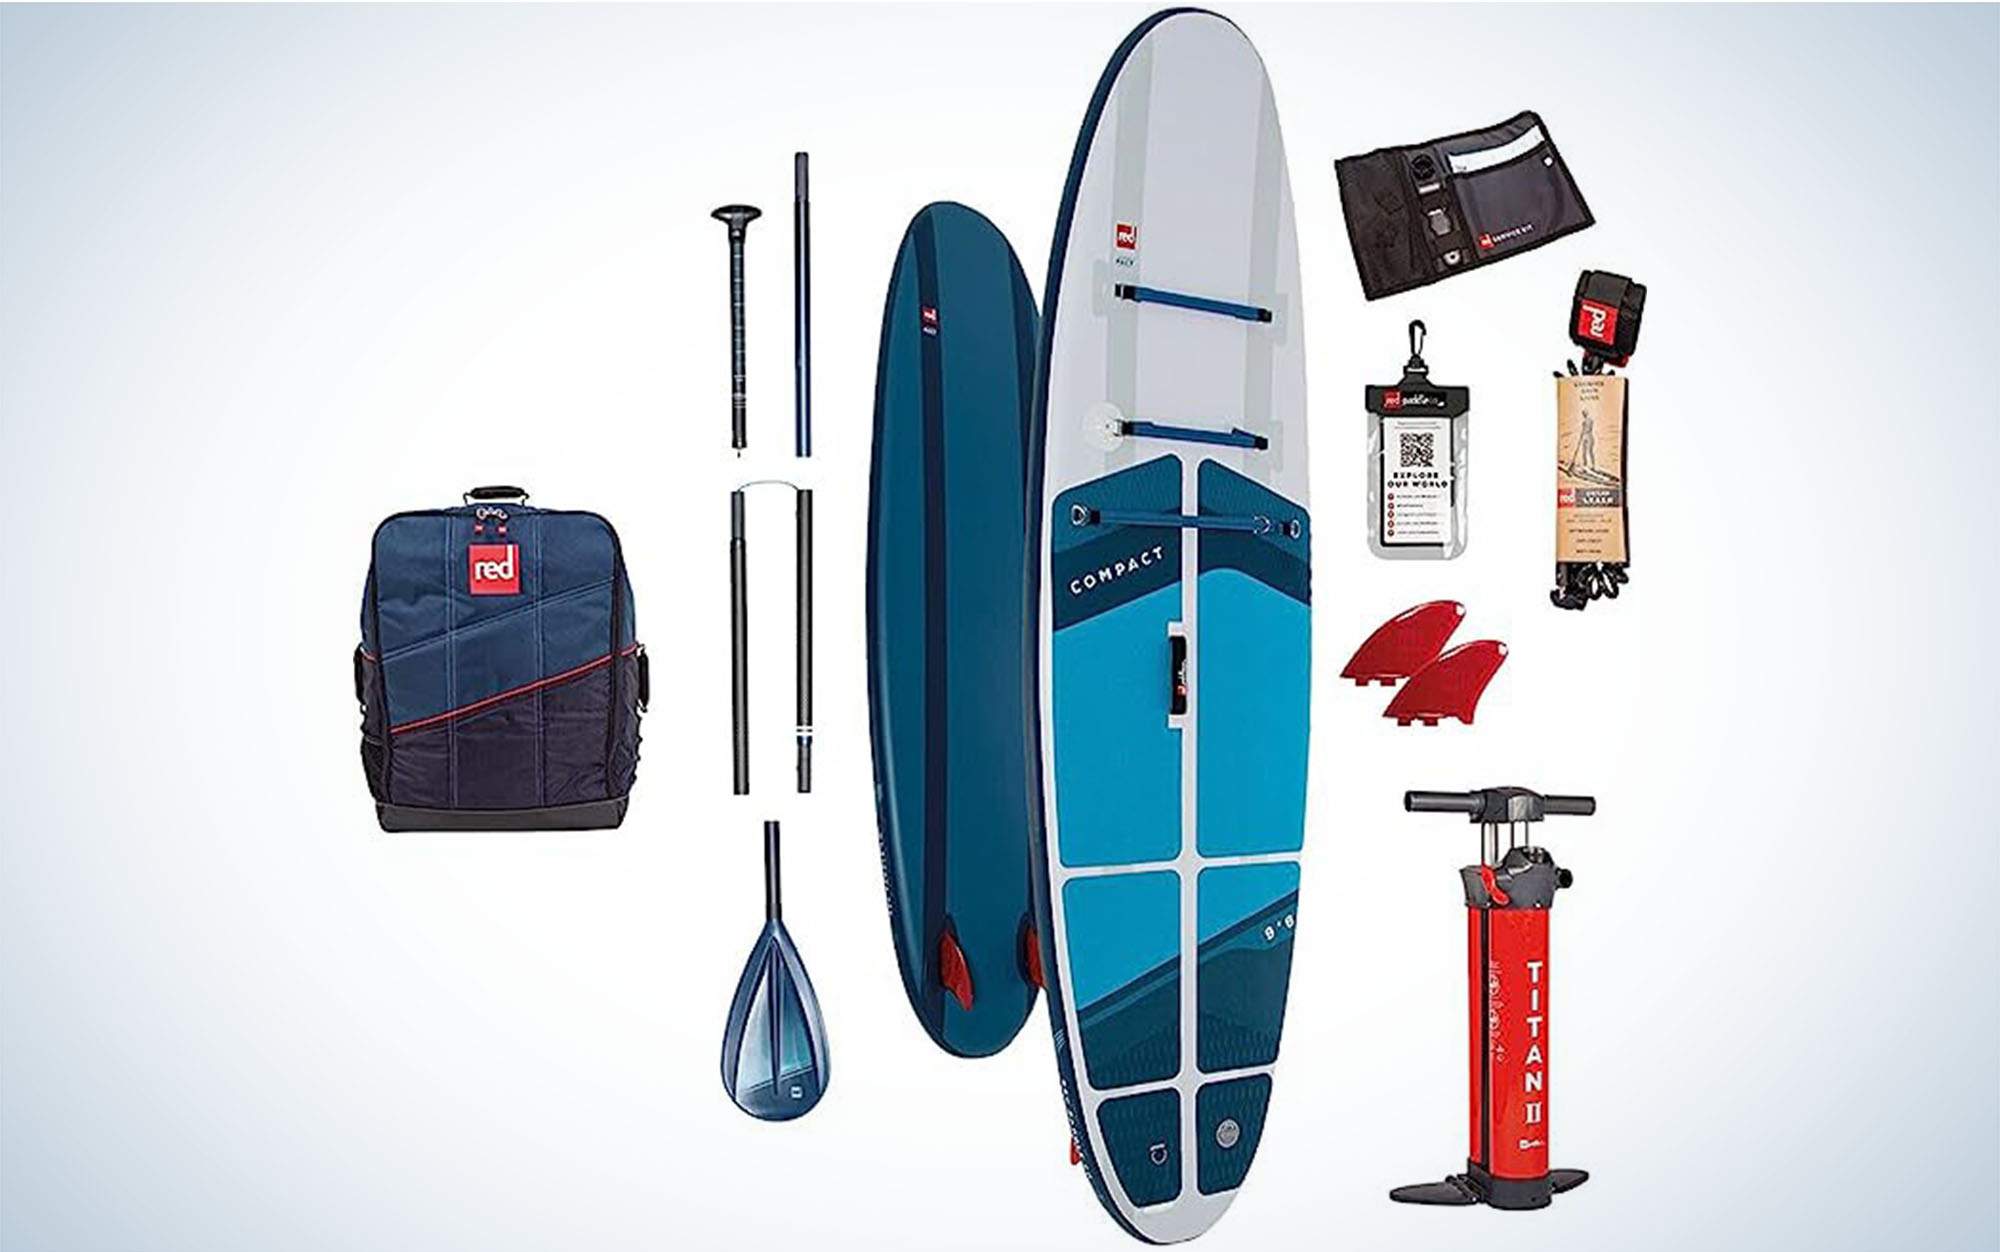 The Red Paddle Compact MSL Pact is one of the best paddle boards.